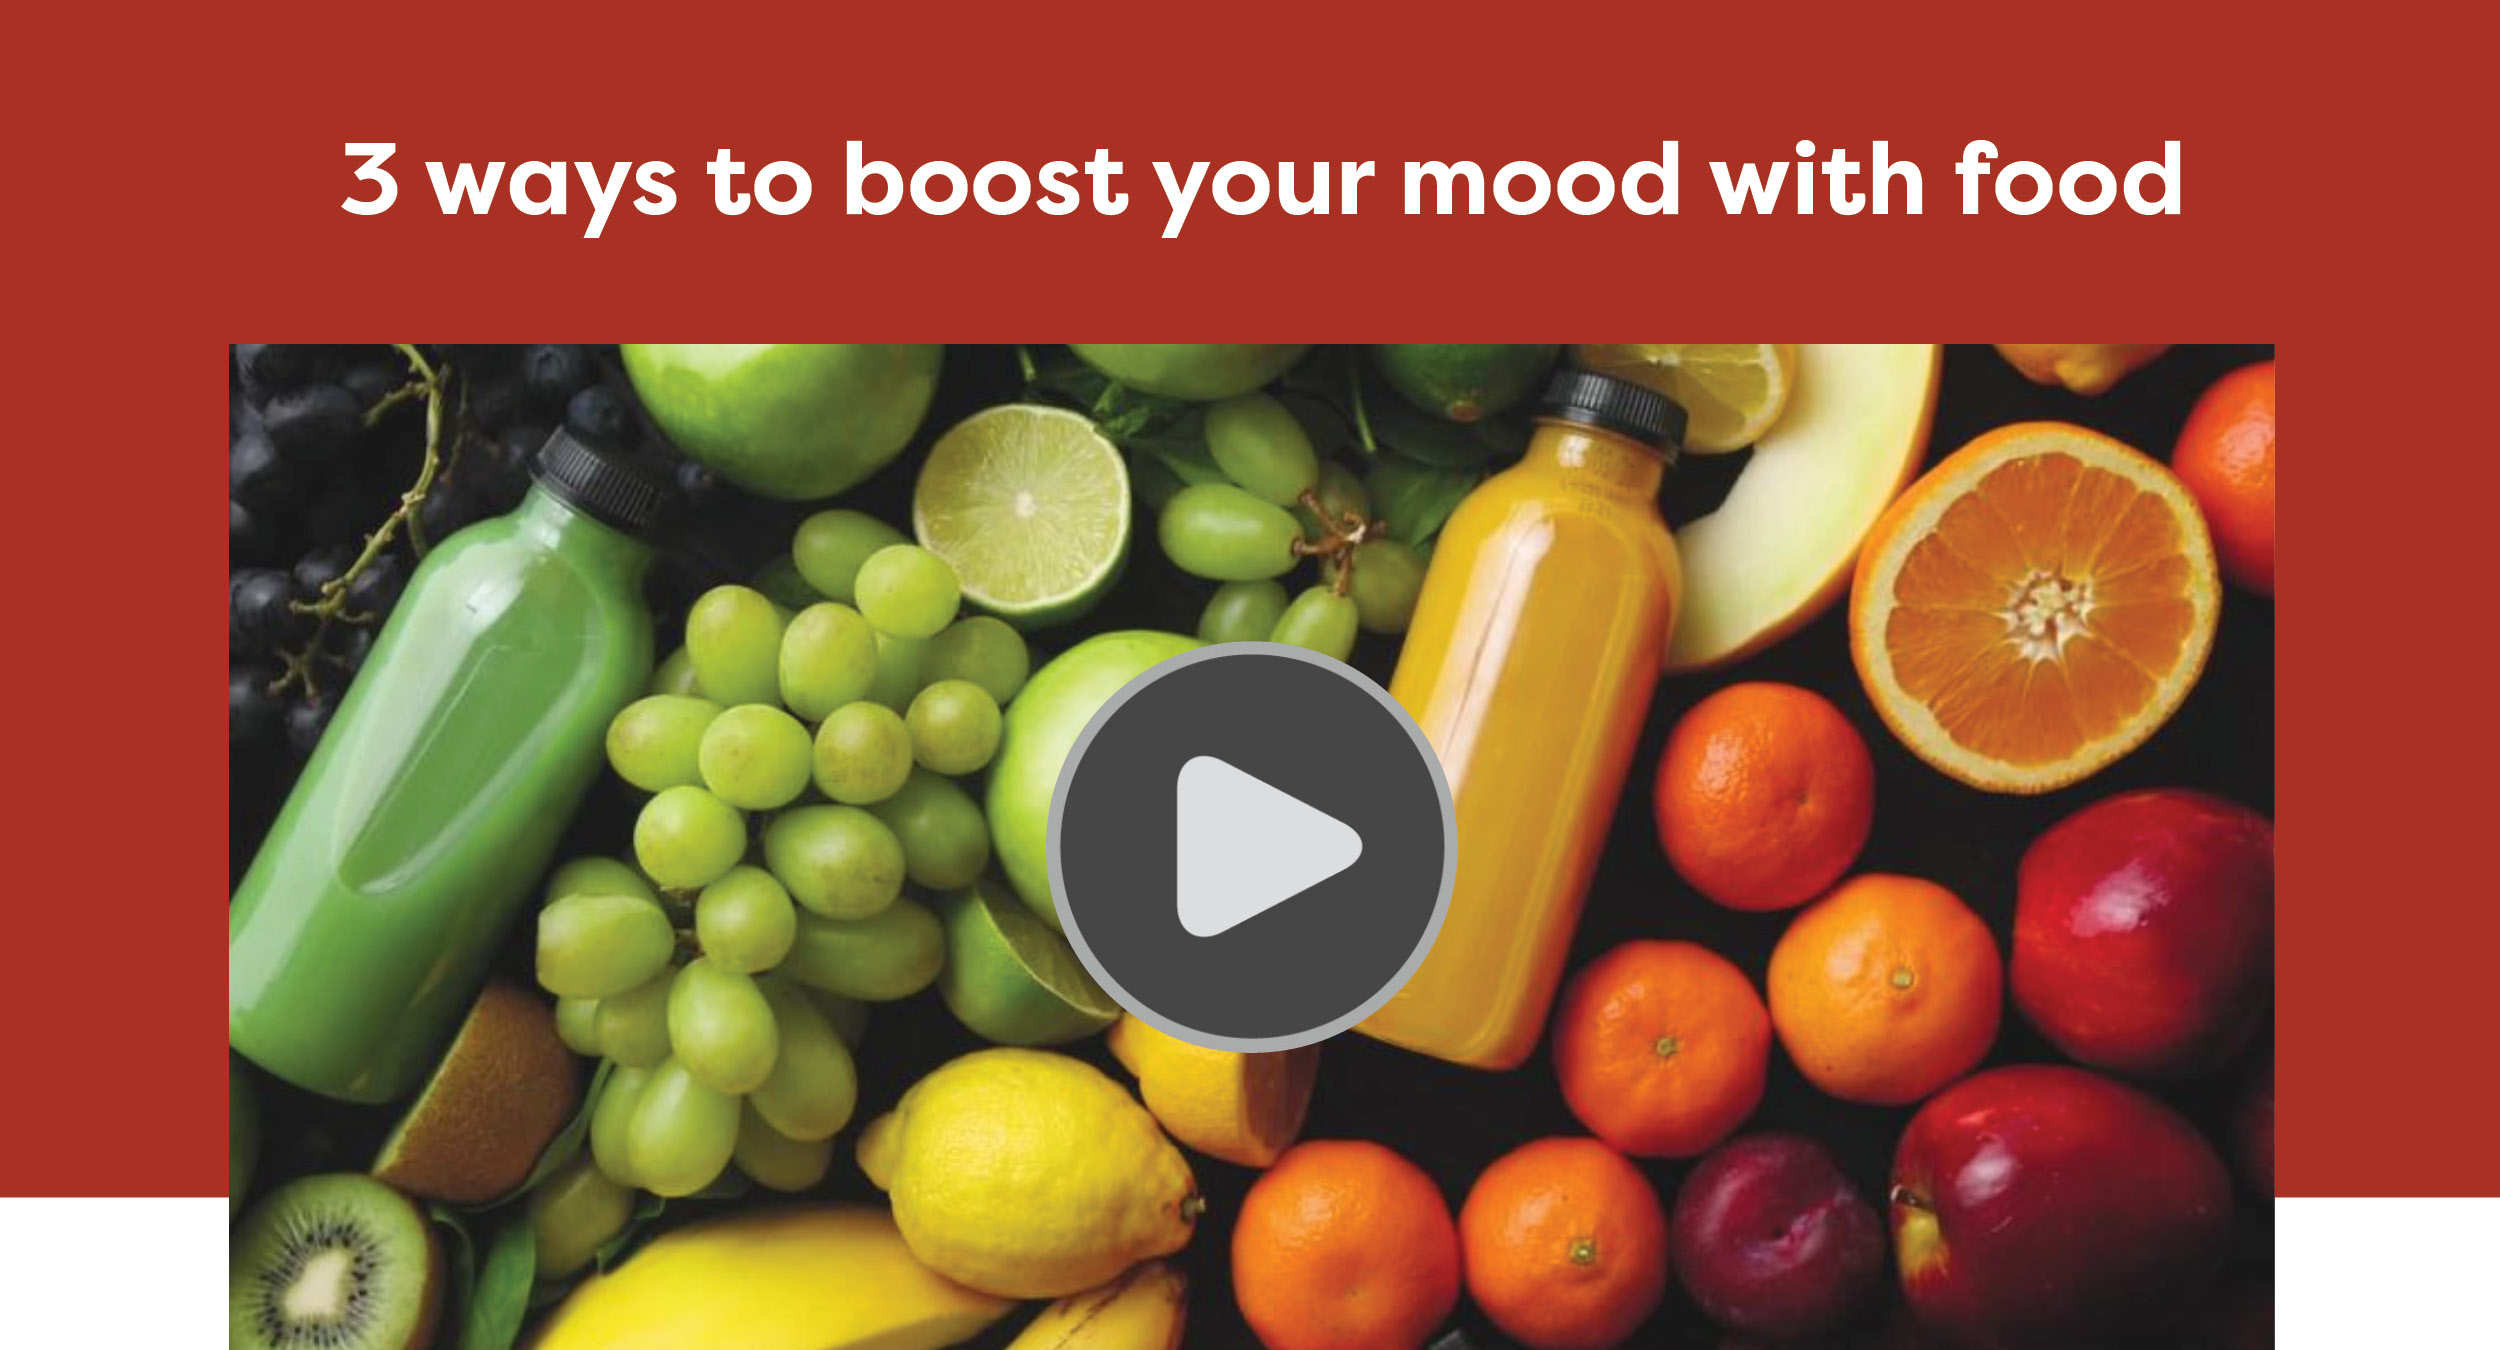 3 ways to boost your mood with food